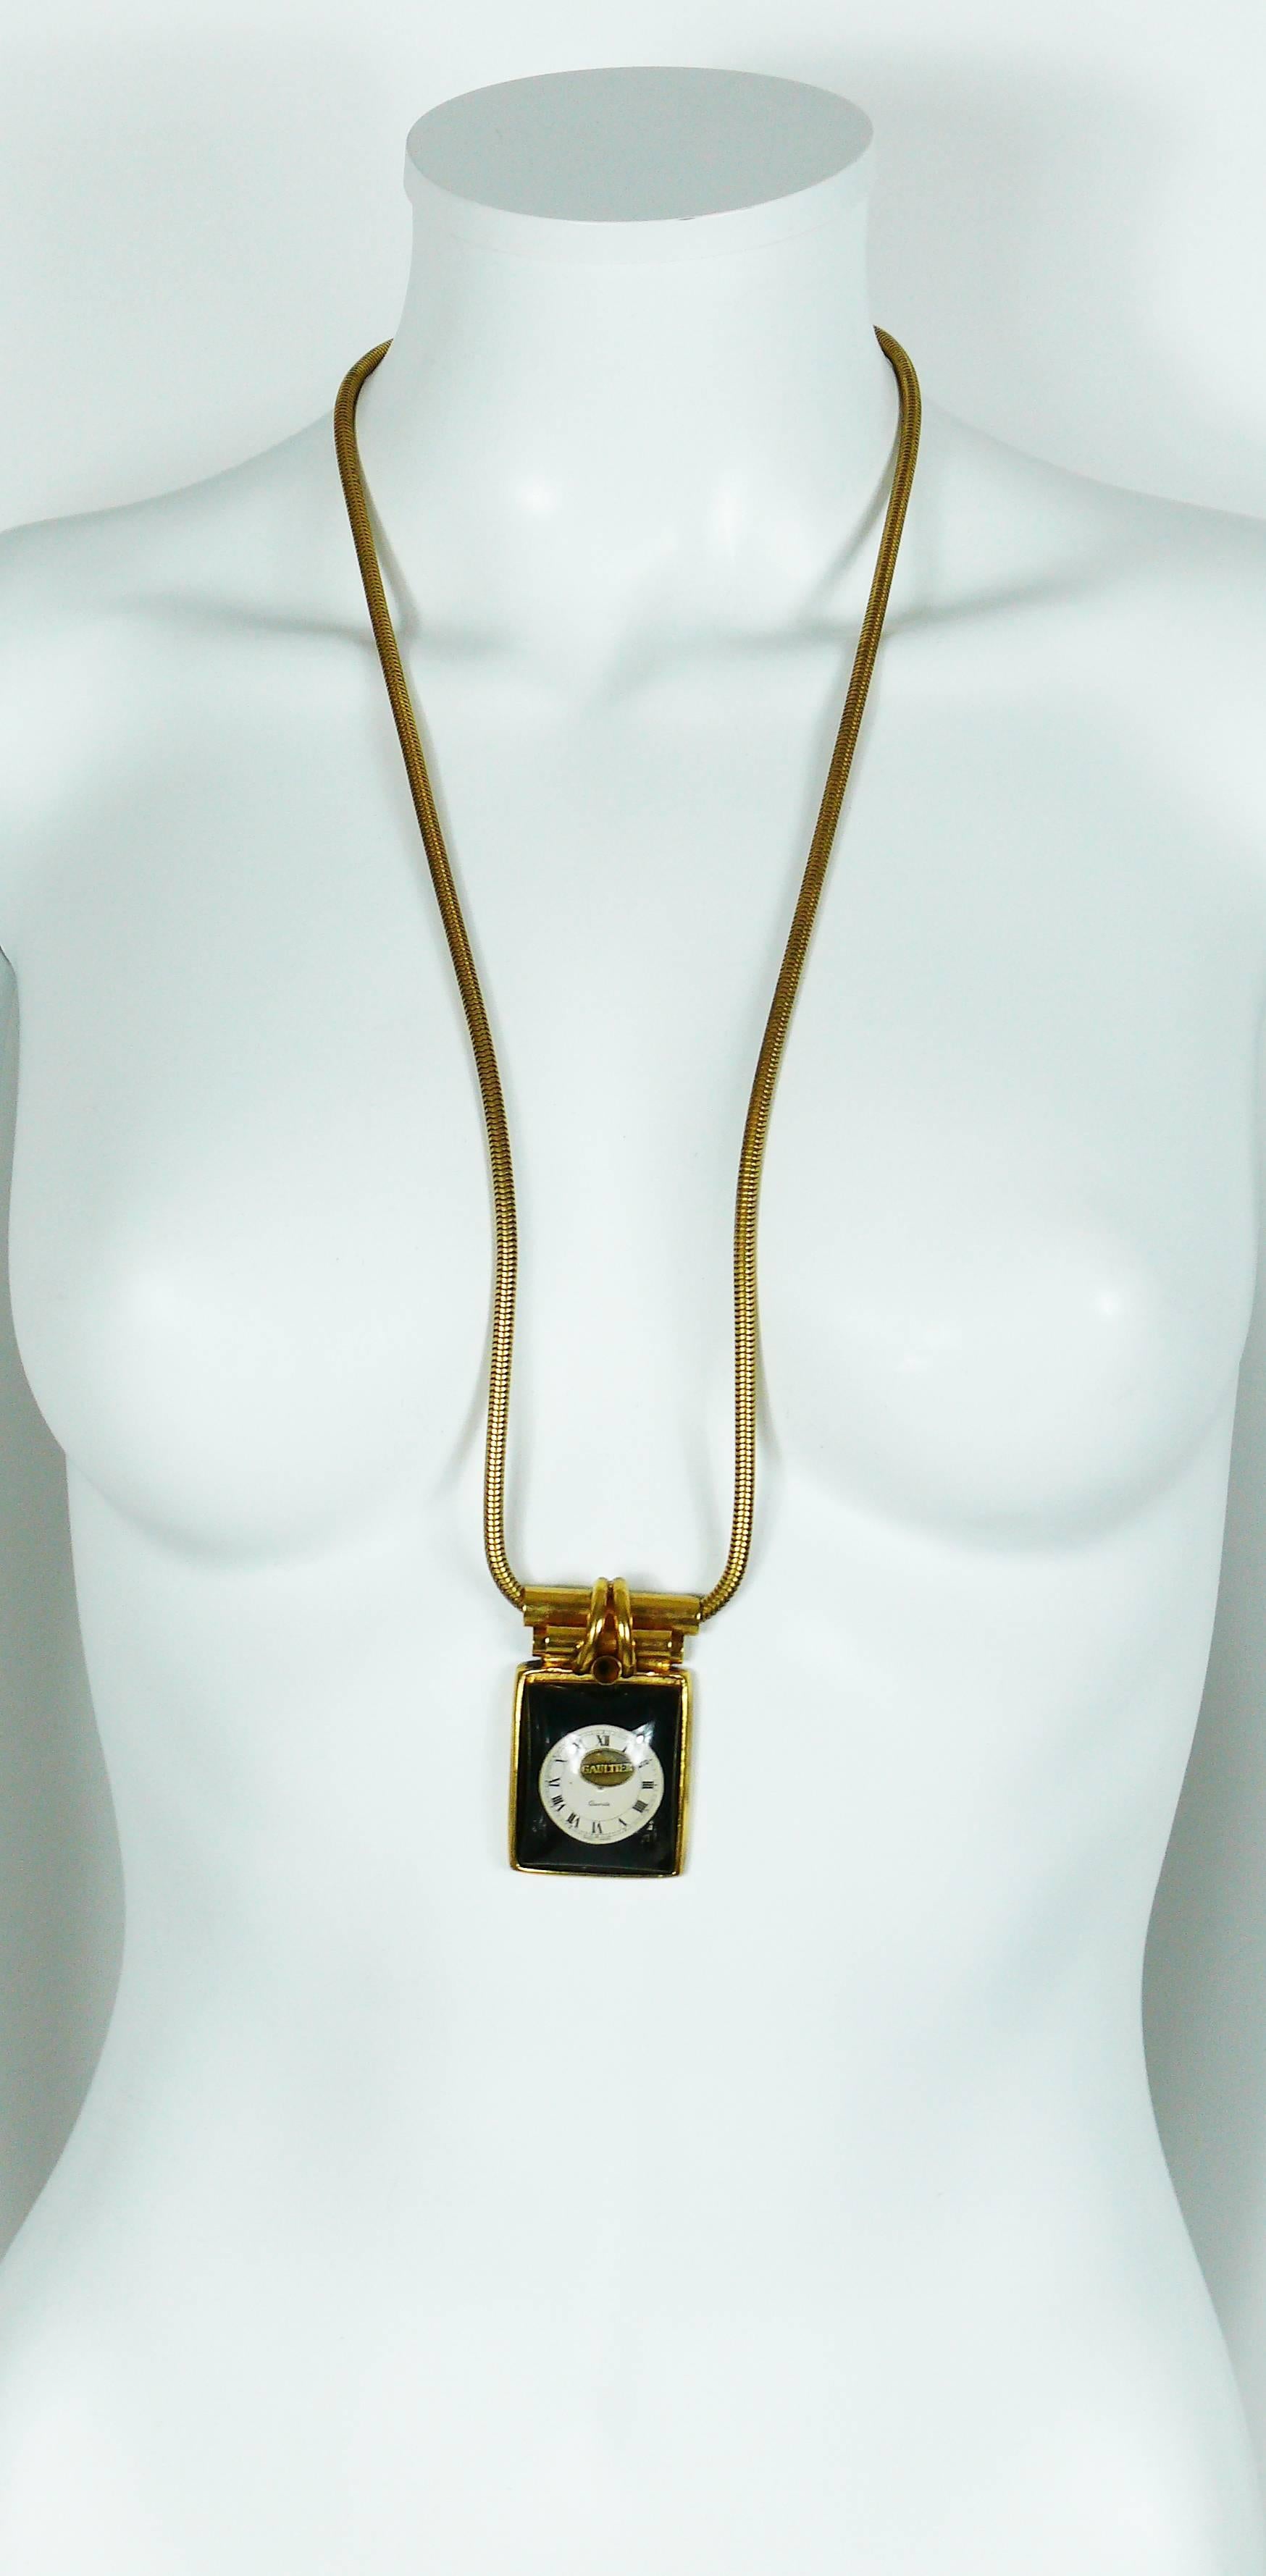 JEAN PAUL GAULTIER rare and collectable vintage steampunk watch pendant necklace.

Gold tone snake chain link featuring a rectangular watch dial in clear resin inlaid.

Marked GAULTIER.

Indicative measurements : total length approx. 80 cm (31.5